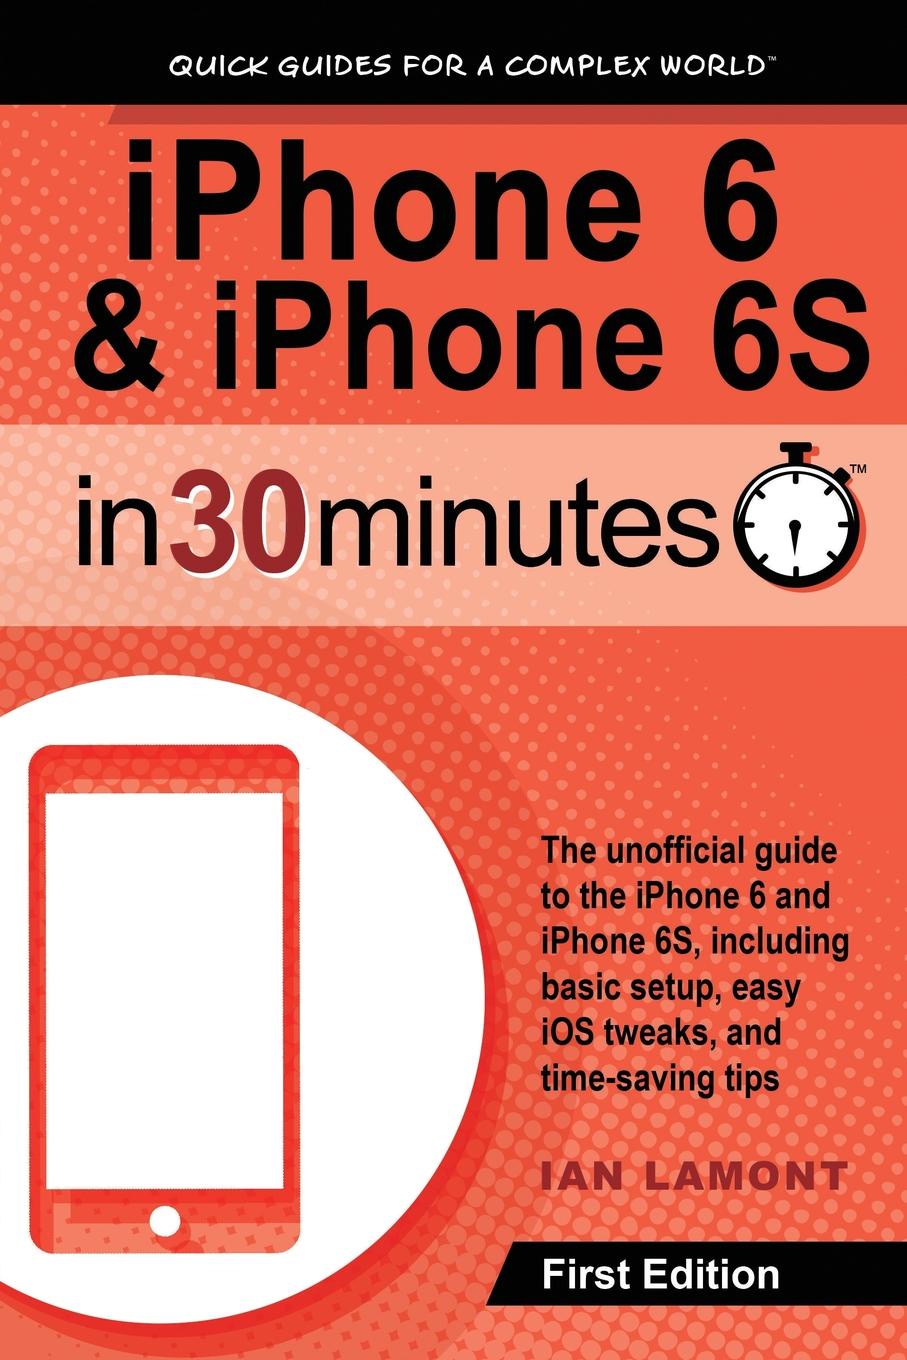 Ian Lamont iPhone 6 . iPhone 6S In 30 Minutes. The unofficial guide to the iPhone 6 and iPhone 6S, including basic setup, easy iOS tweaks, and time-saving tips